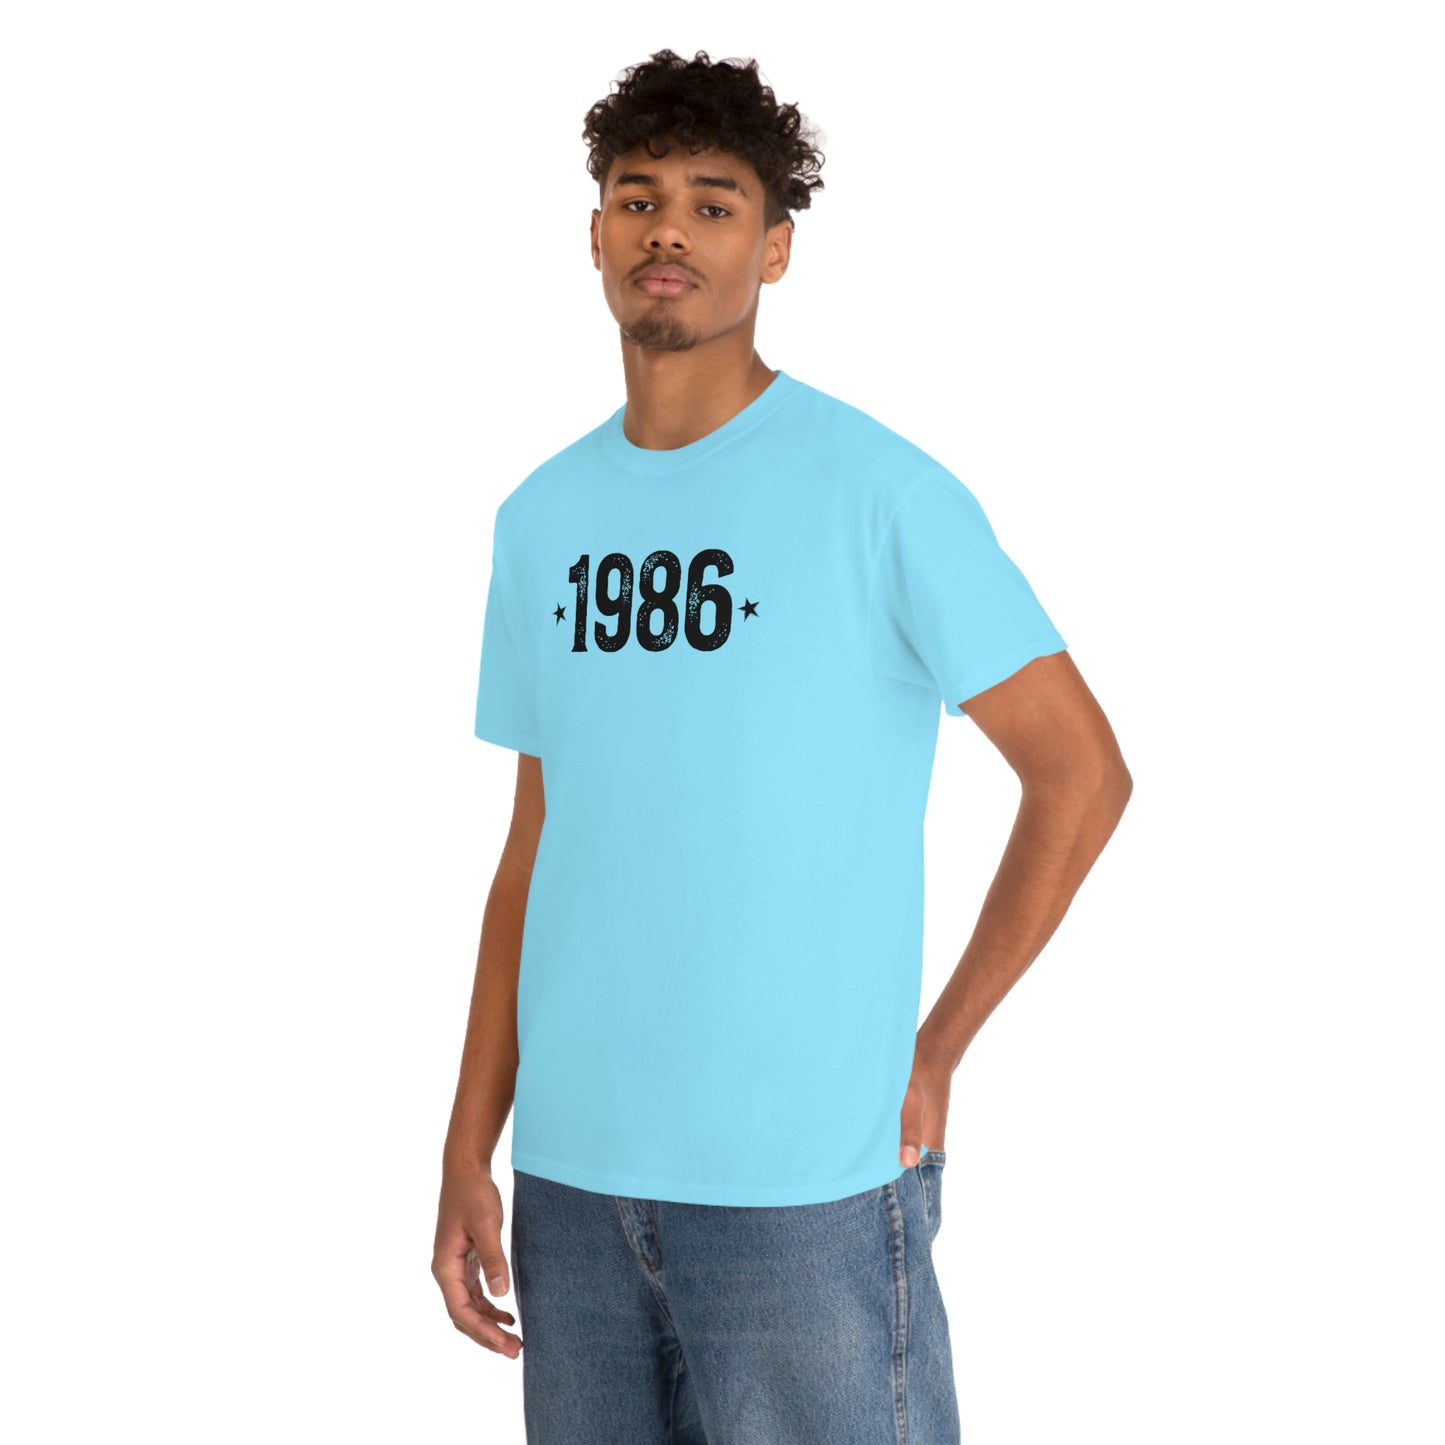 "1986 Birthday Year" T-Shirt - Weave Got Gifts - Unique Gifts You Won’t Find Anywhere Else!